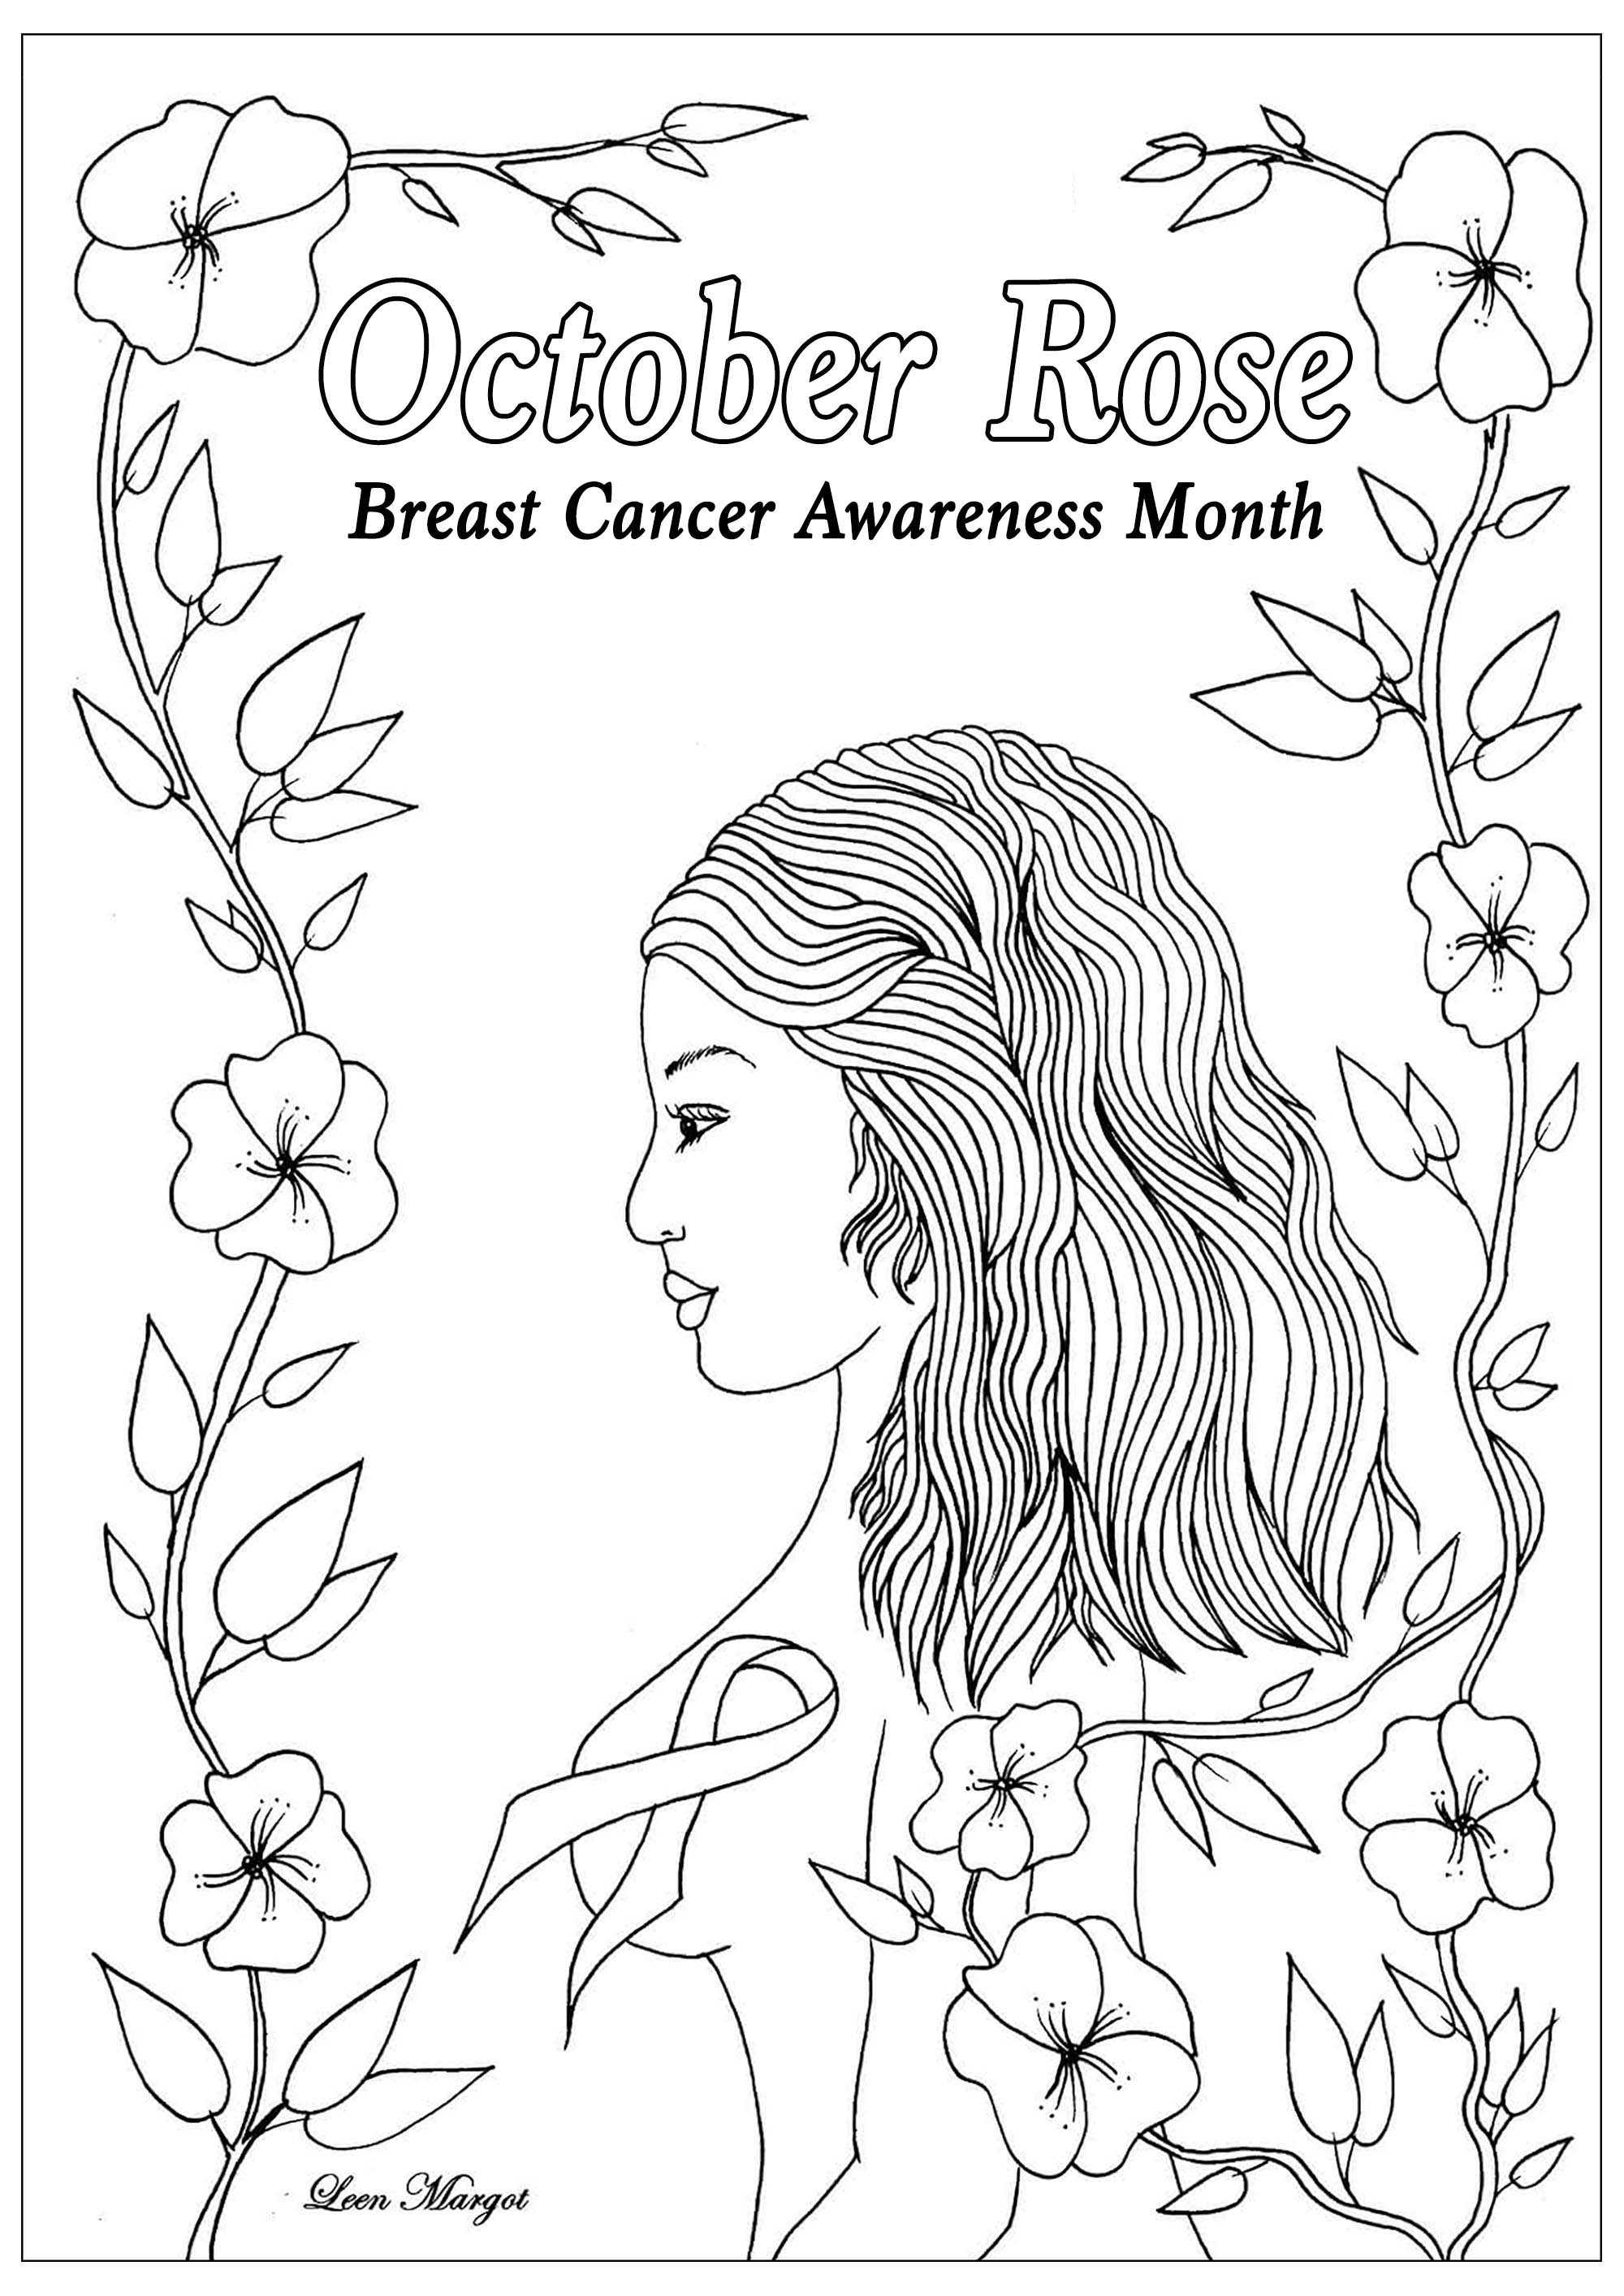 Exclusive coloring page created for October rose : Breast Cancer Awareness Month (Version 1), Artist : Leen Margot